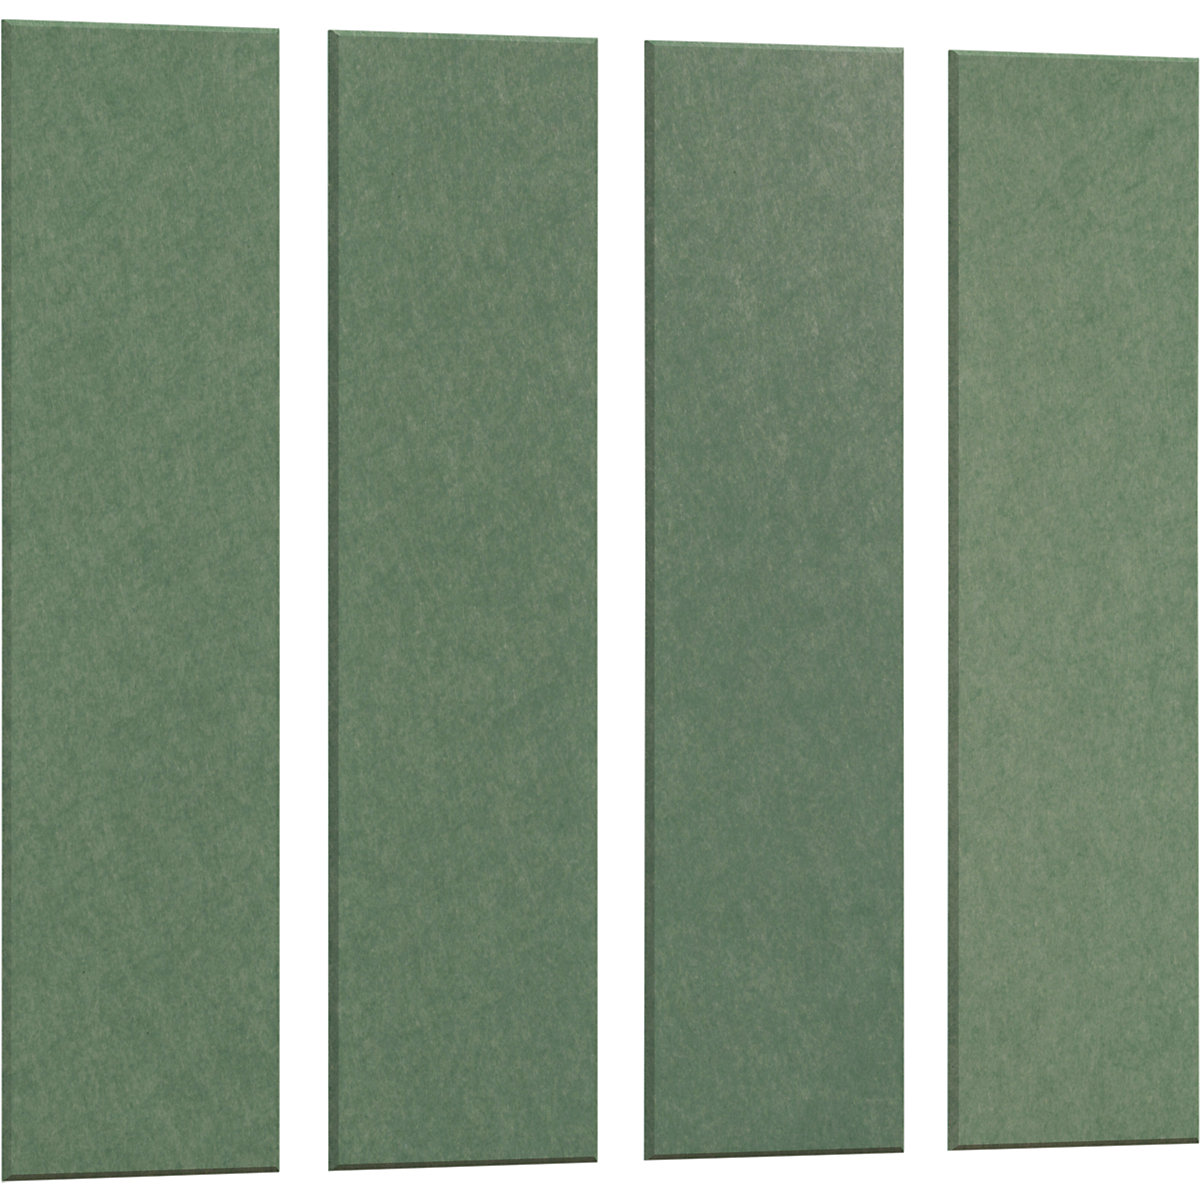 Acoustic wall panel – eurokraft basic: HxW 1200 x 300 mm, pack of 4